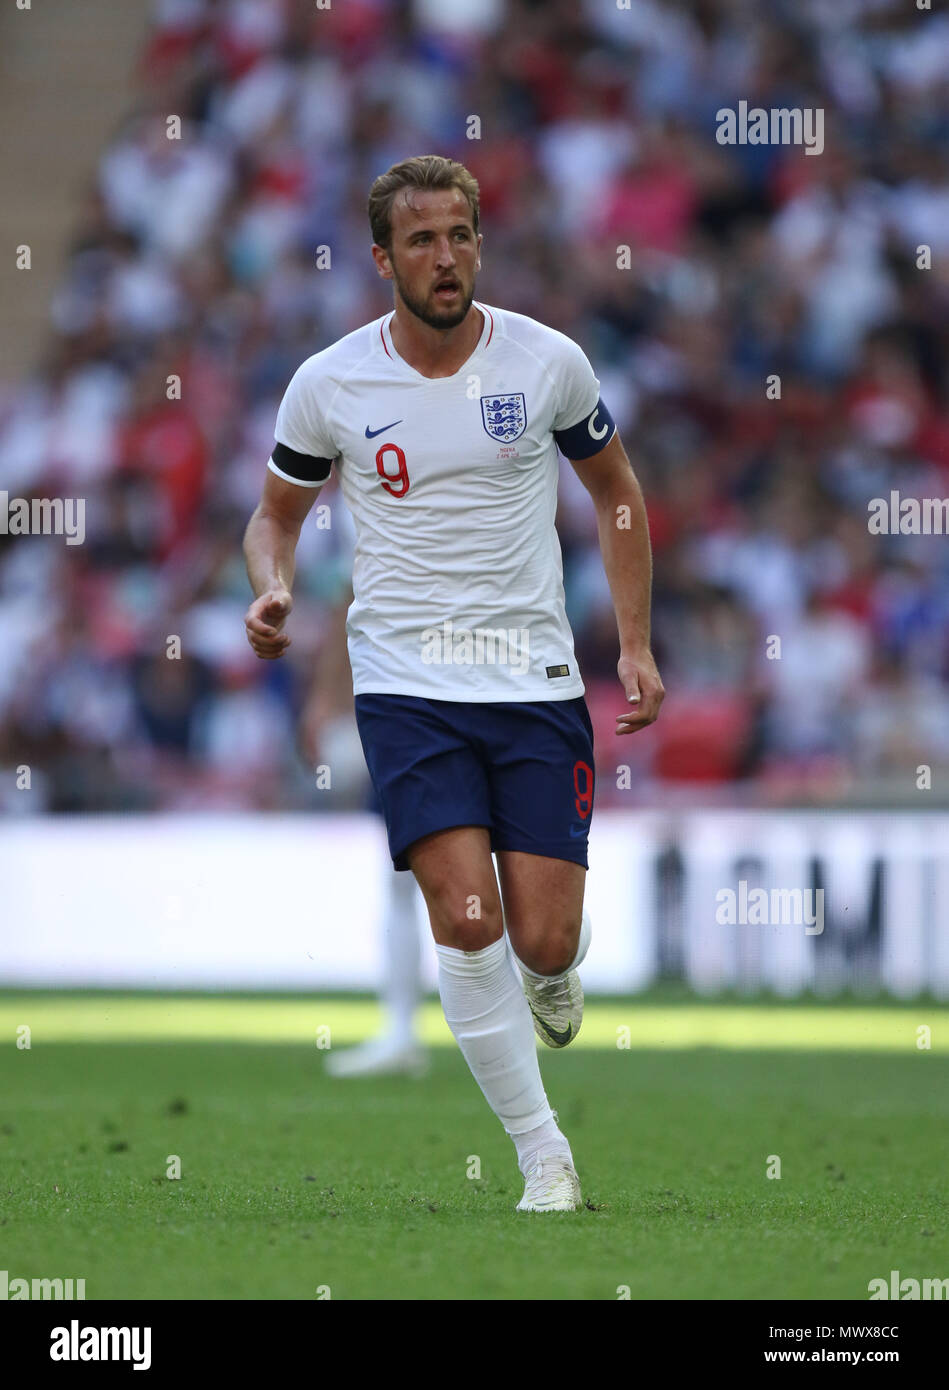 Wembley, London, UK. 2nd Jun, 2018. Harry Kane (E) at the England v Nigeria Friendly International match, at Wembley Stadium, on June 2, 2018. **This picture is for editorial use only** Credit: Paul Marriott/Alamy Live News Stock Photo